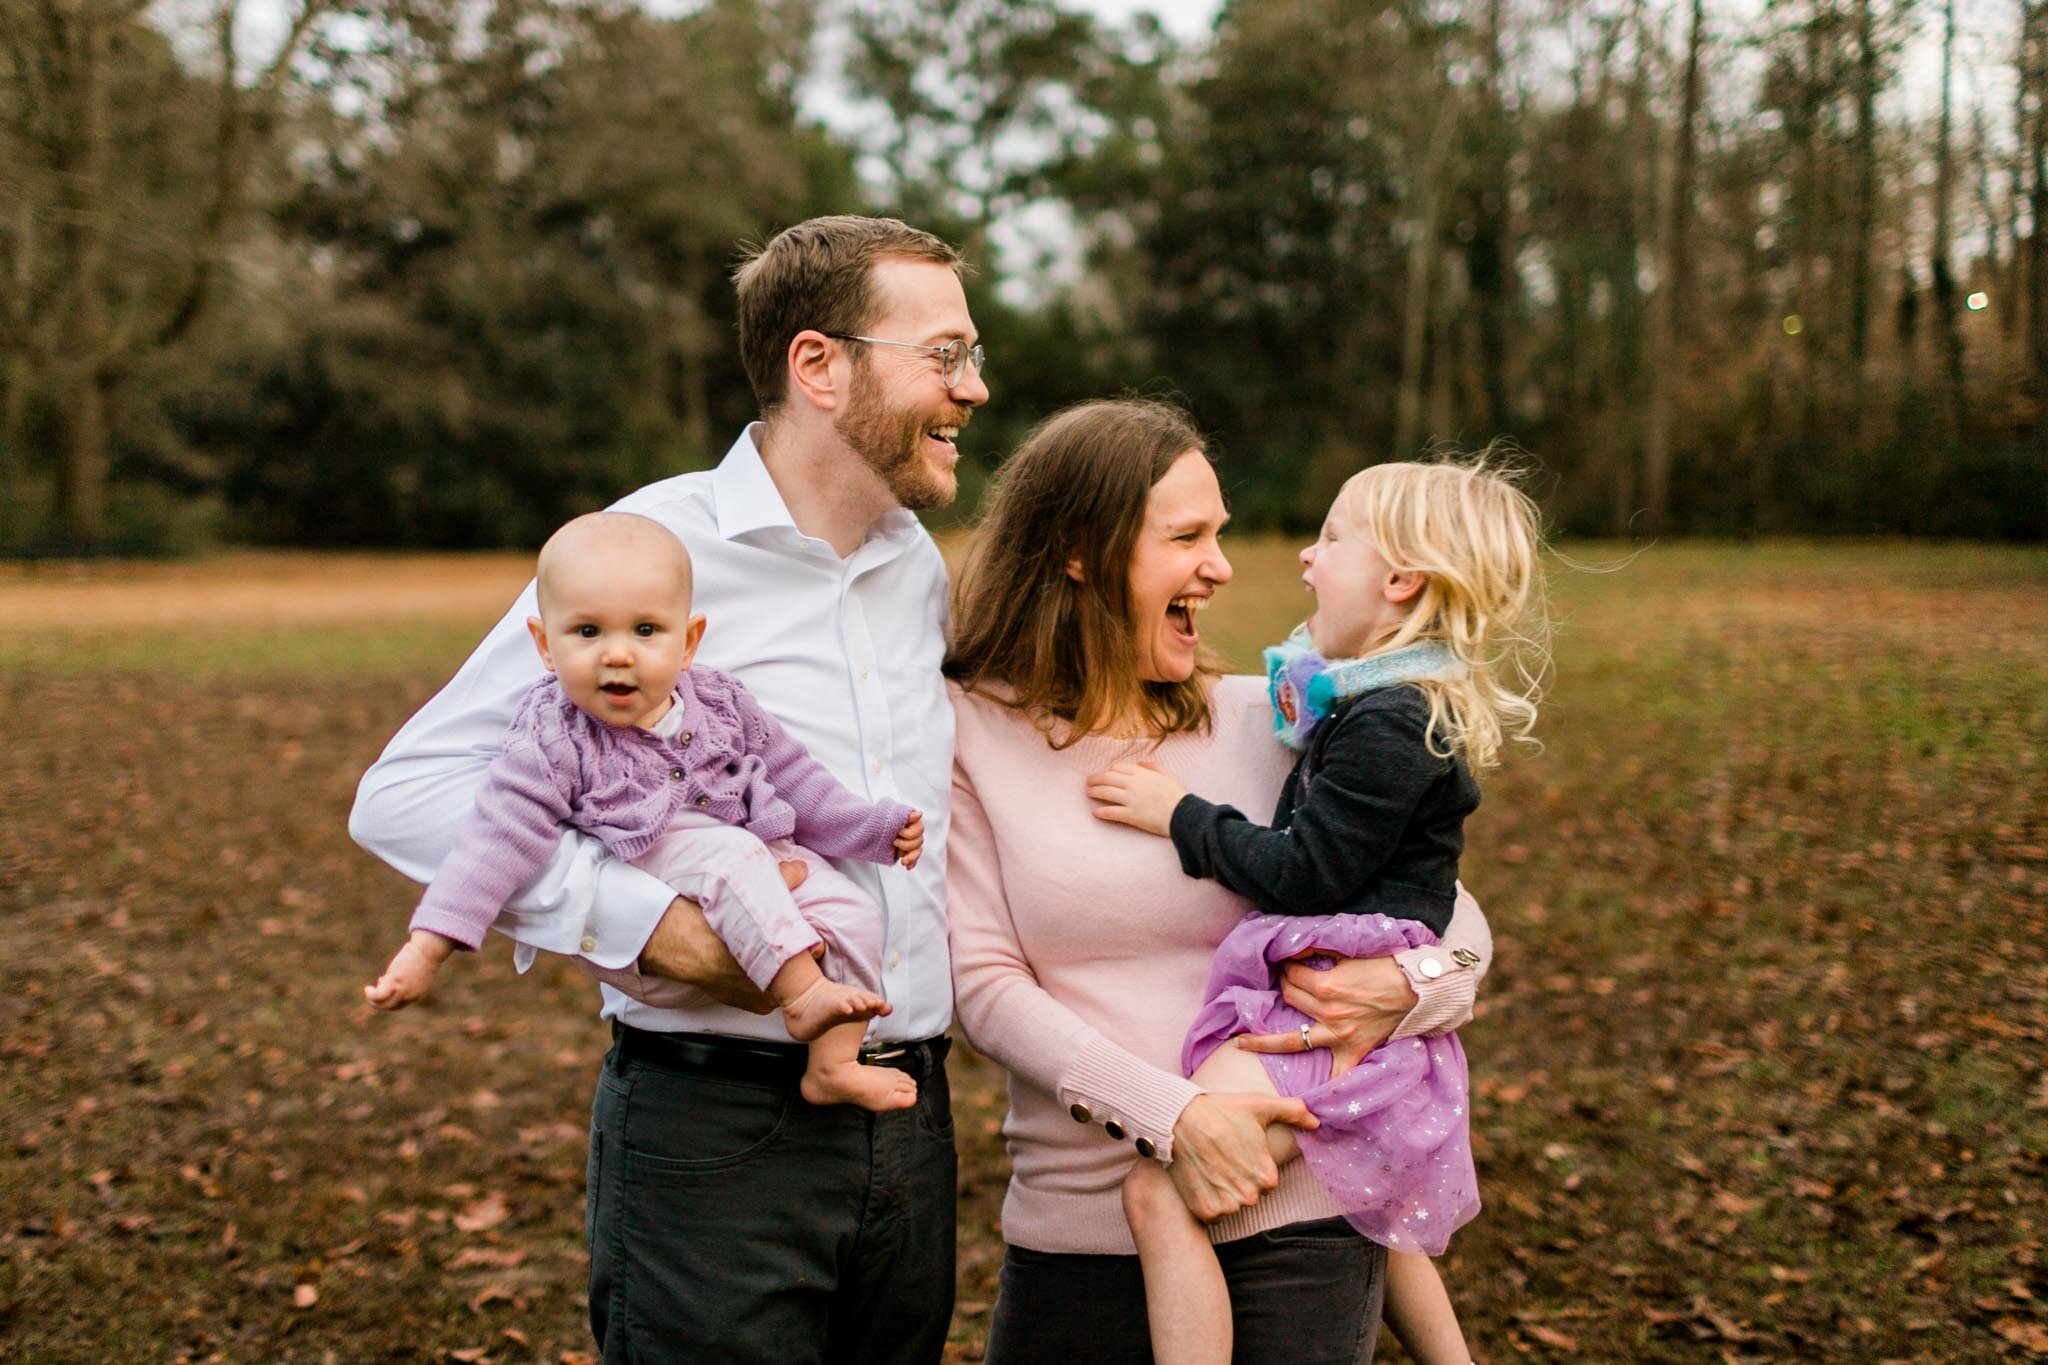 Durham Family Photographer | By G. Lin Photography | Candid family portrait with children laughing